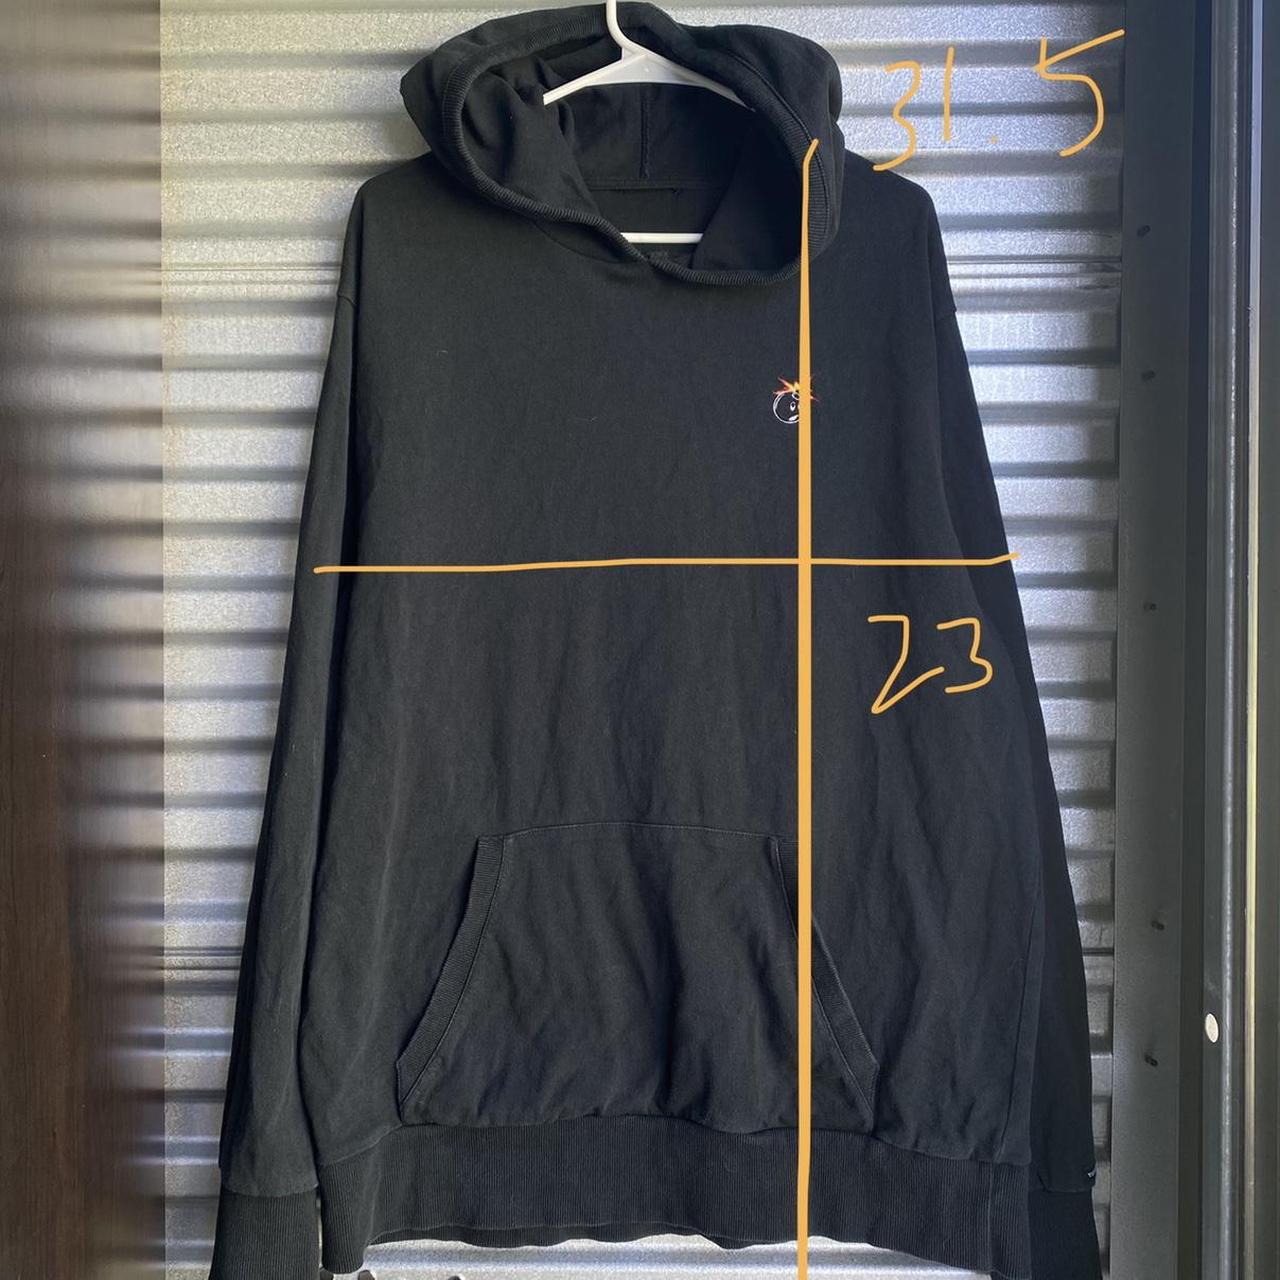 Product Image 2 - The hundreds bomb hoodie 
Doesn’t